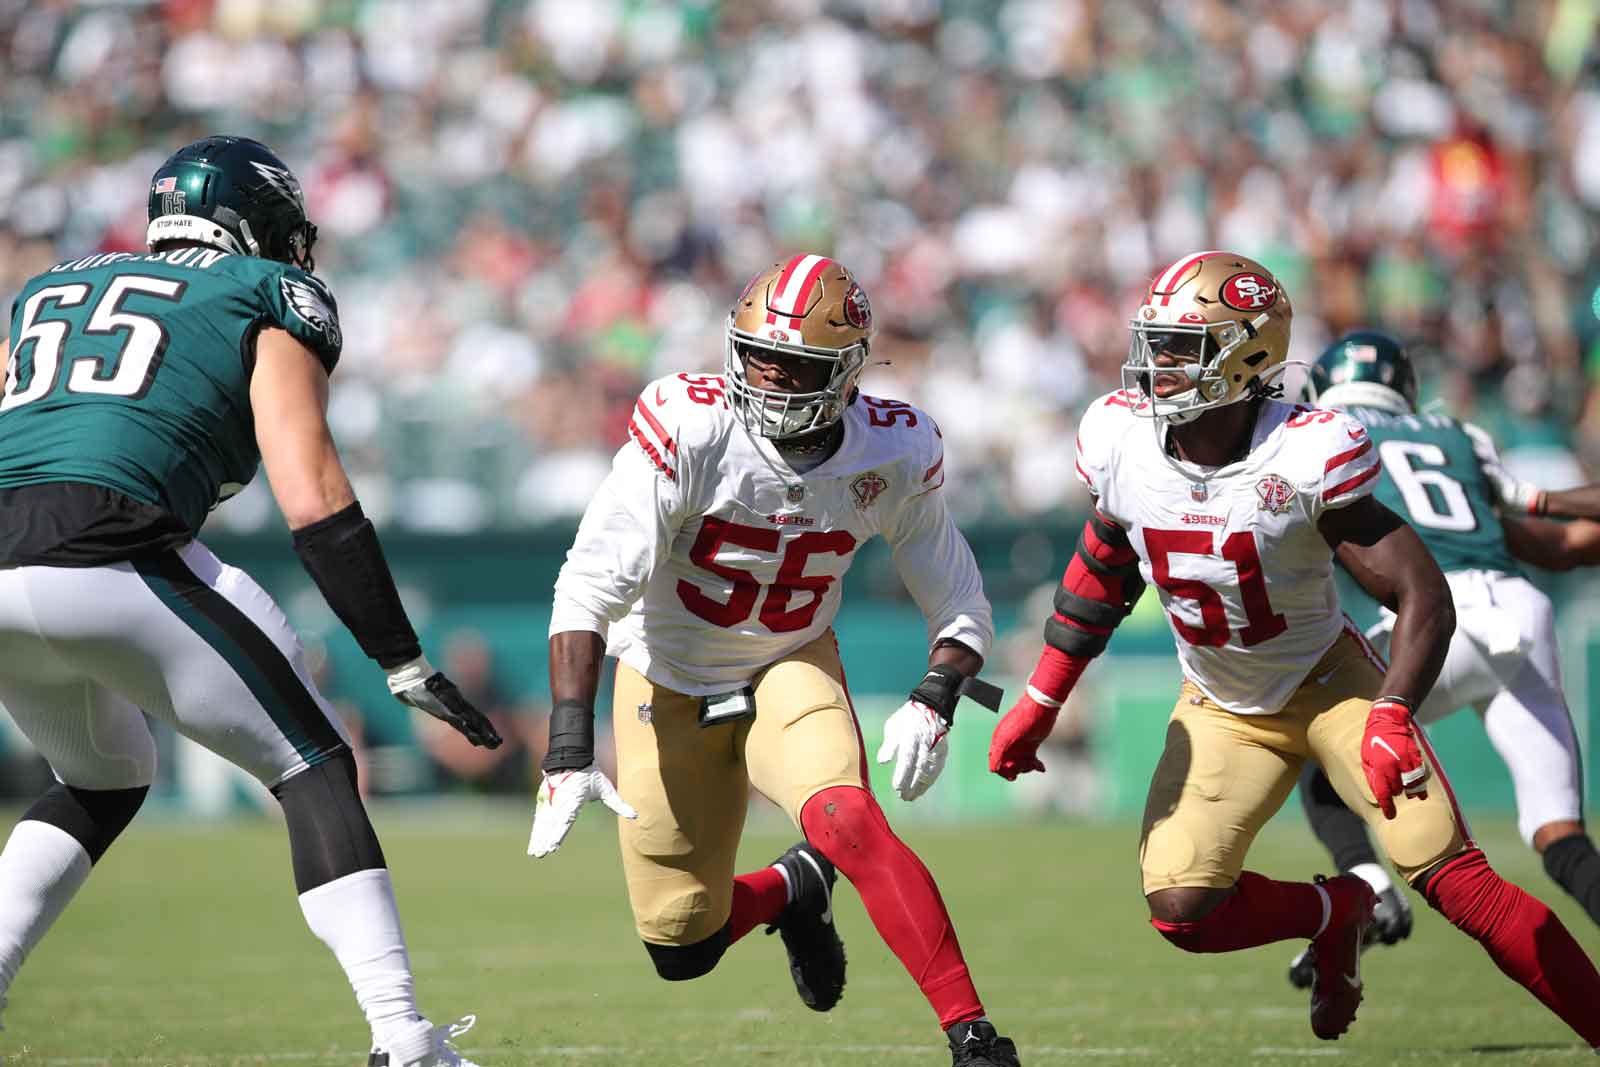 49ers vs Eagles live stream: how to watch NFL playoff game online